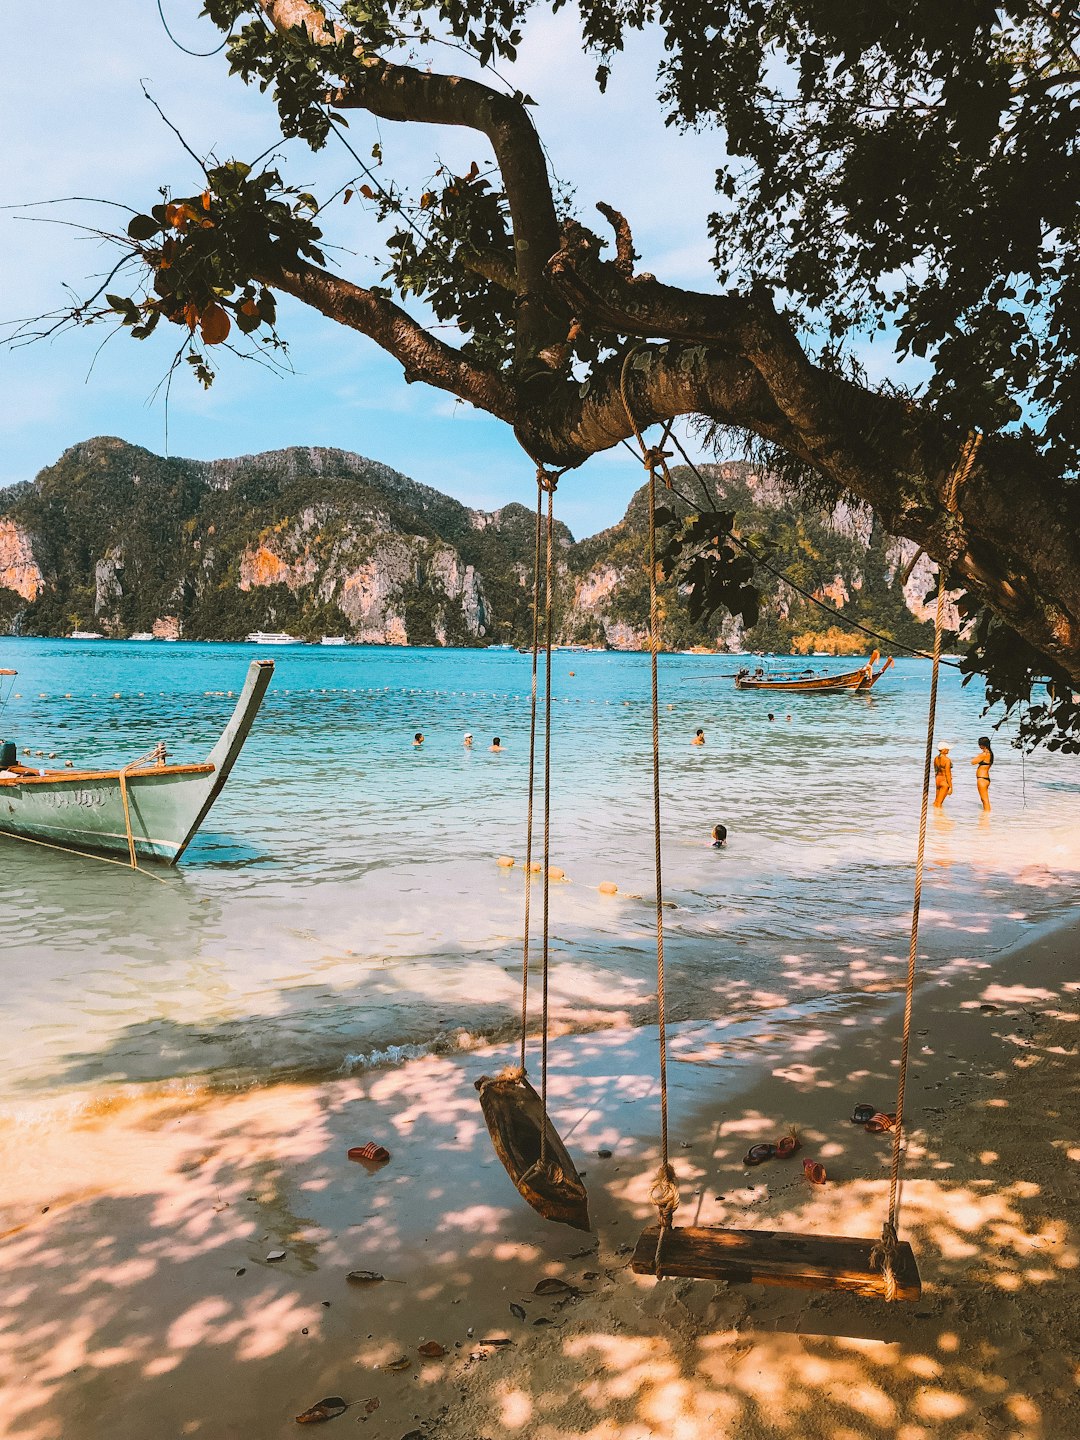 travelers stories about Beach in Phi Phi Islands, Thailand